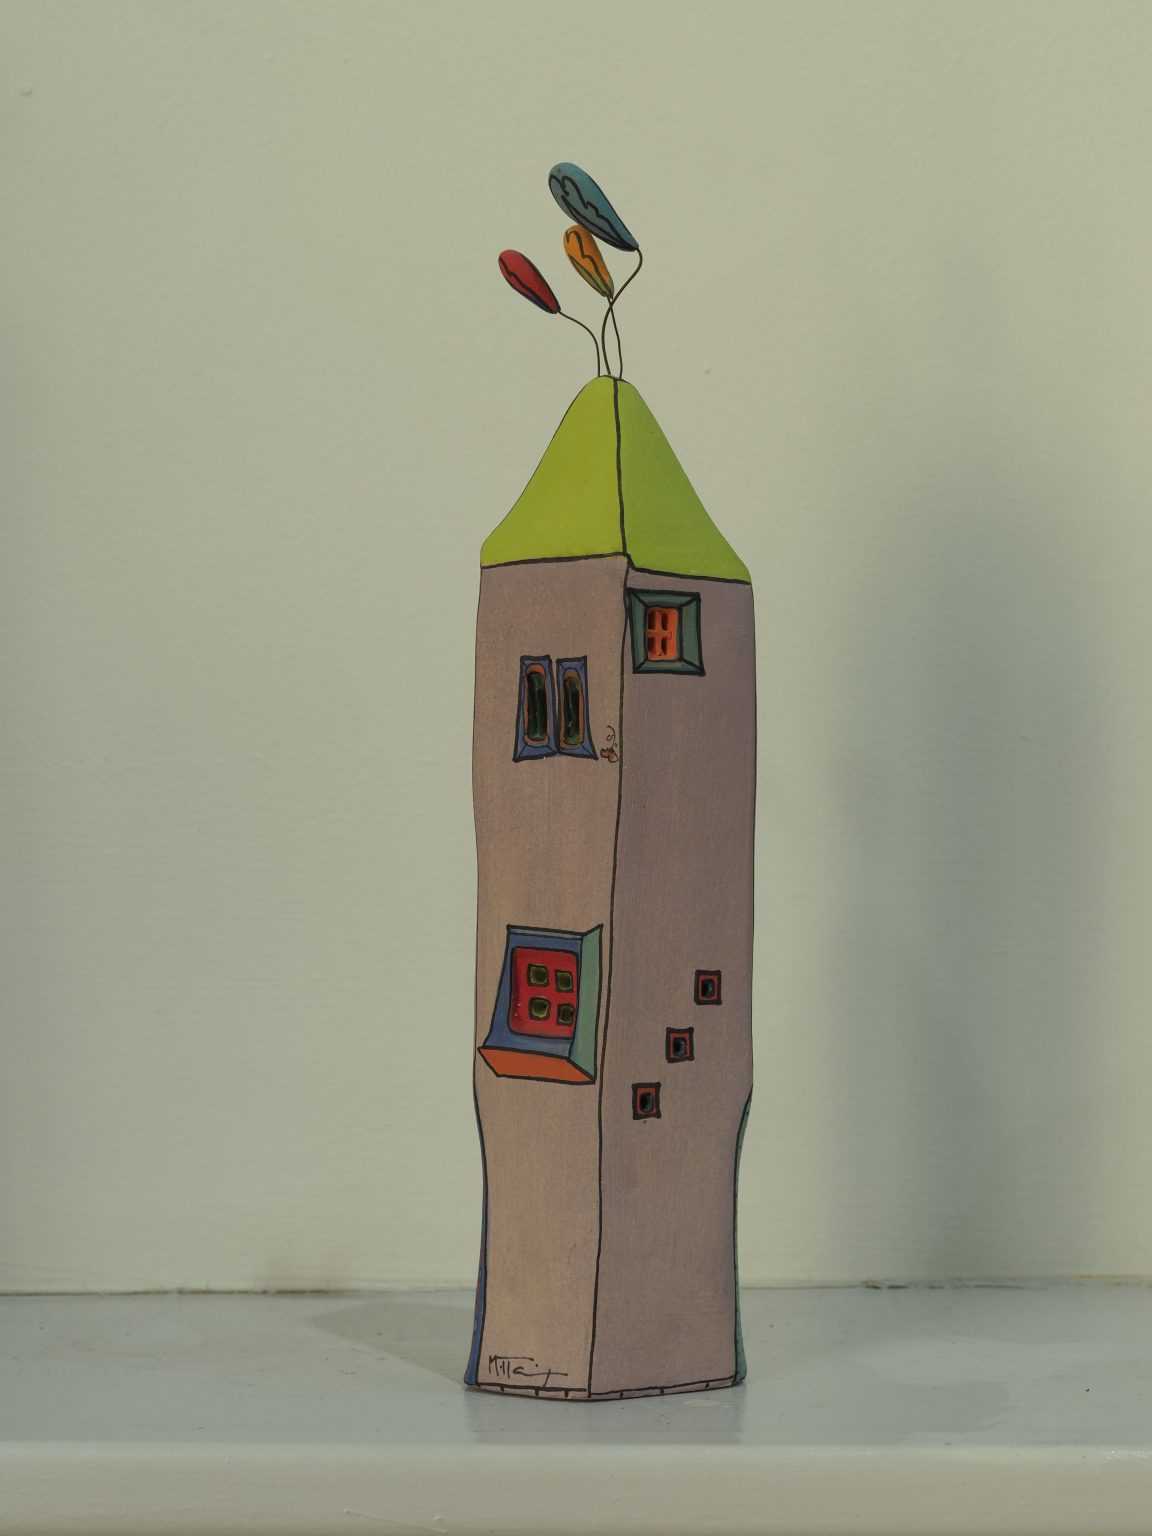 ceramic houses from Maria Petratou's collection